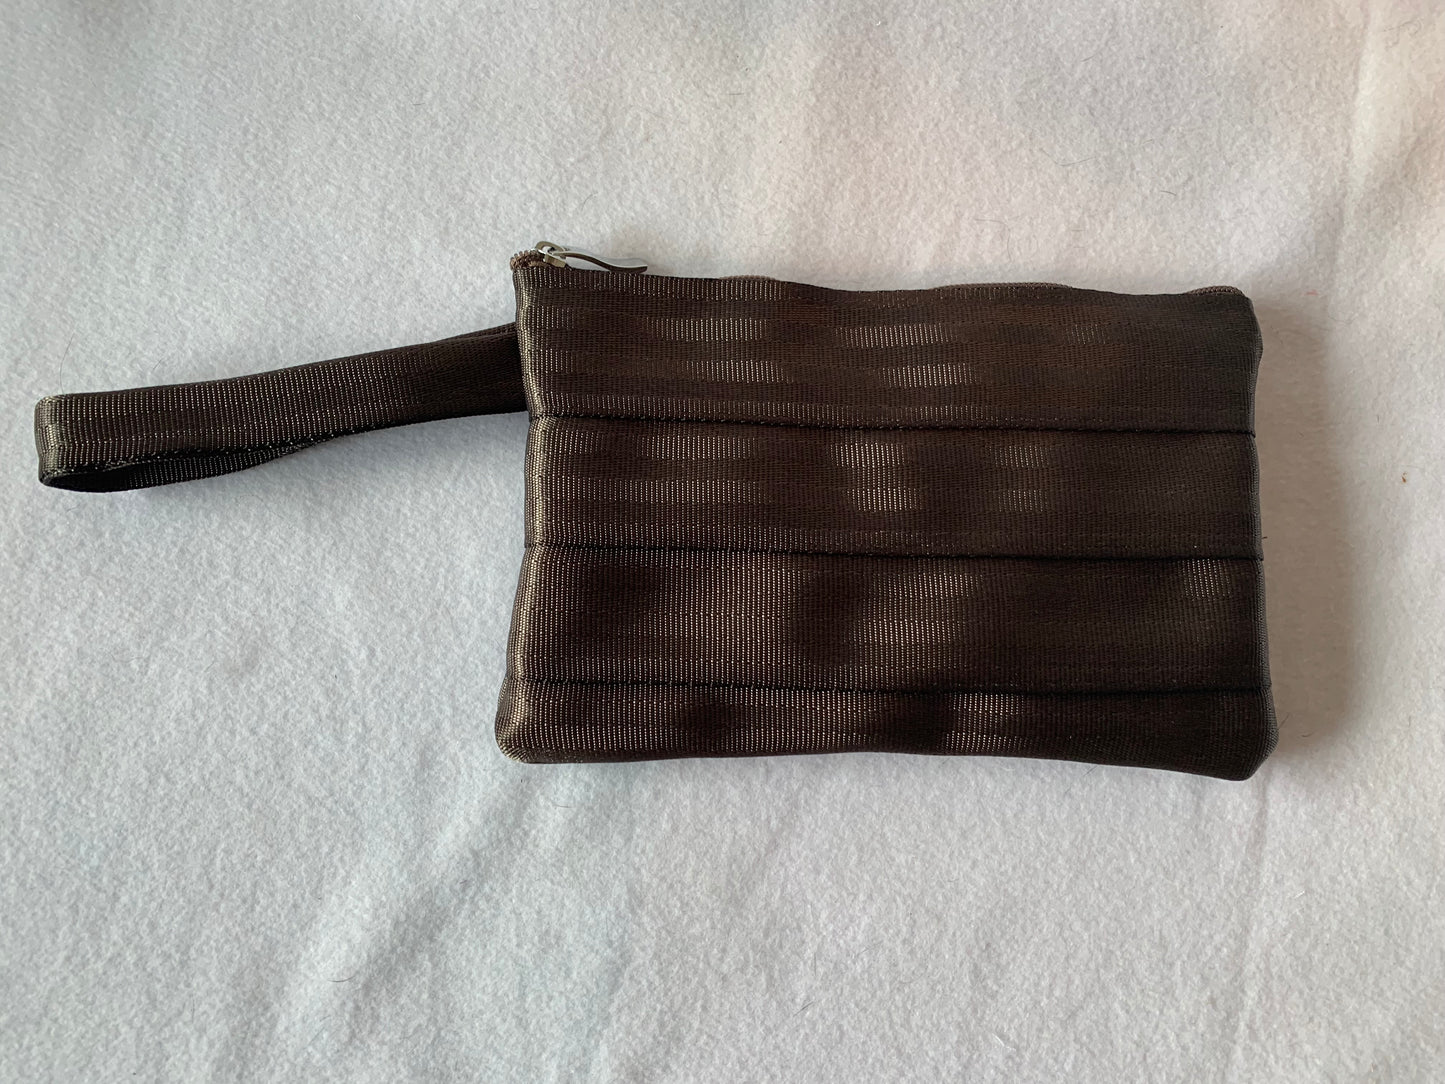 Seat belt clutch with wrist strap, various colors, lined or unlined, make up bag